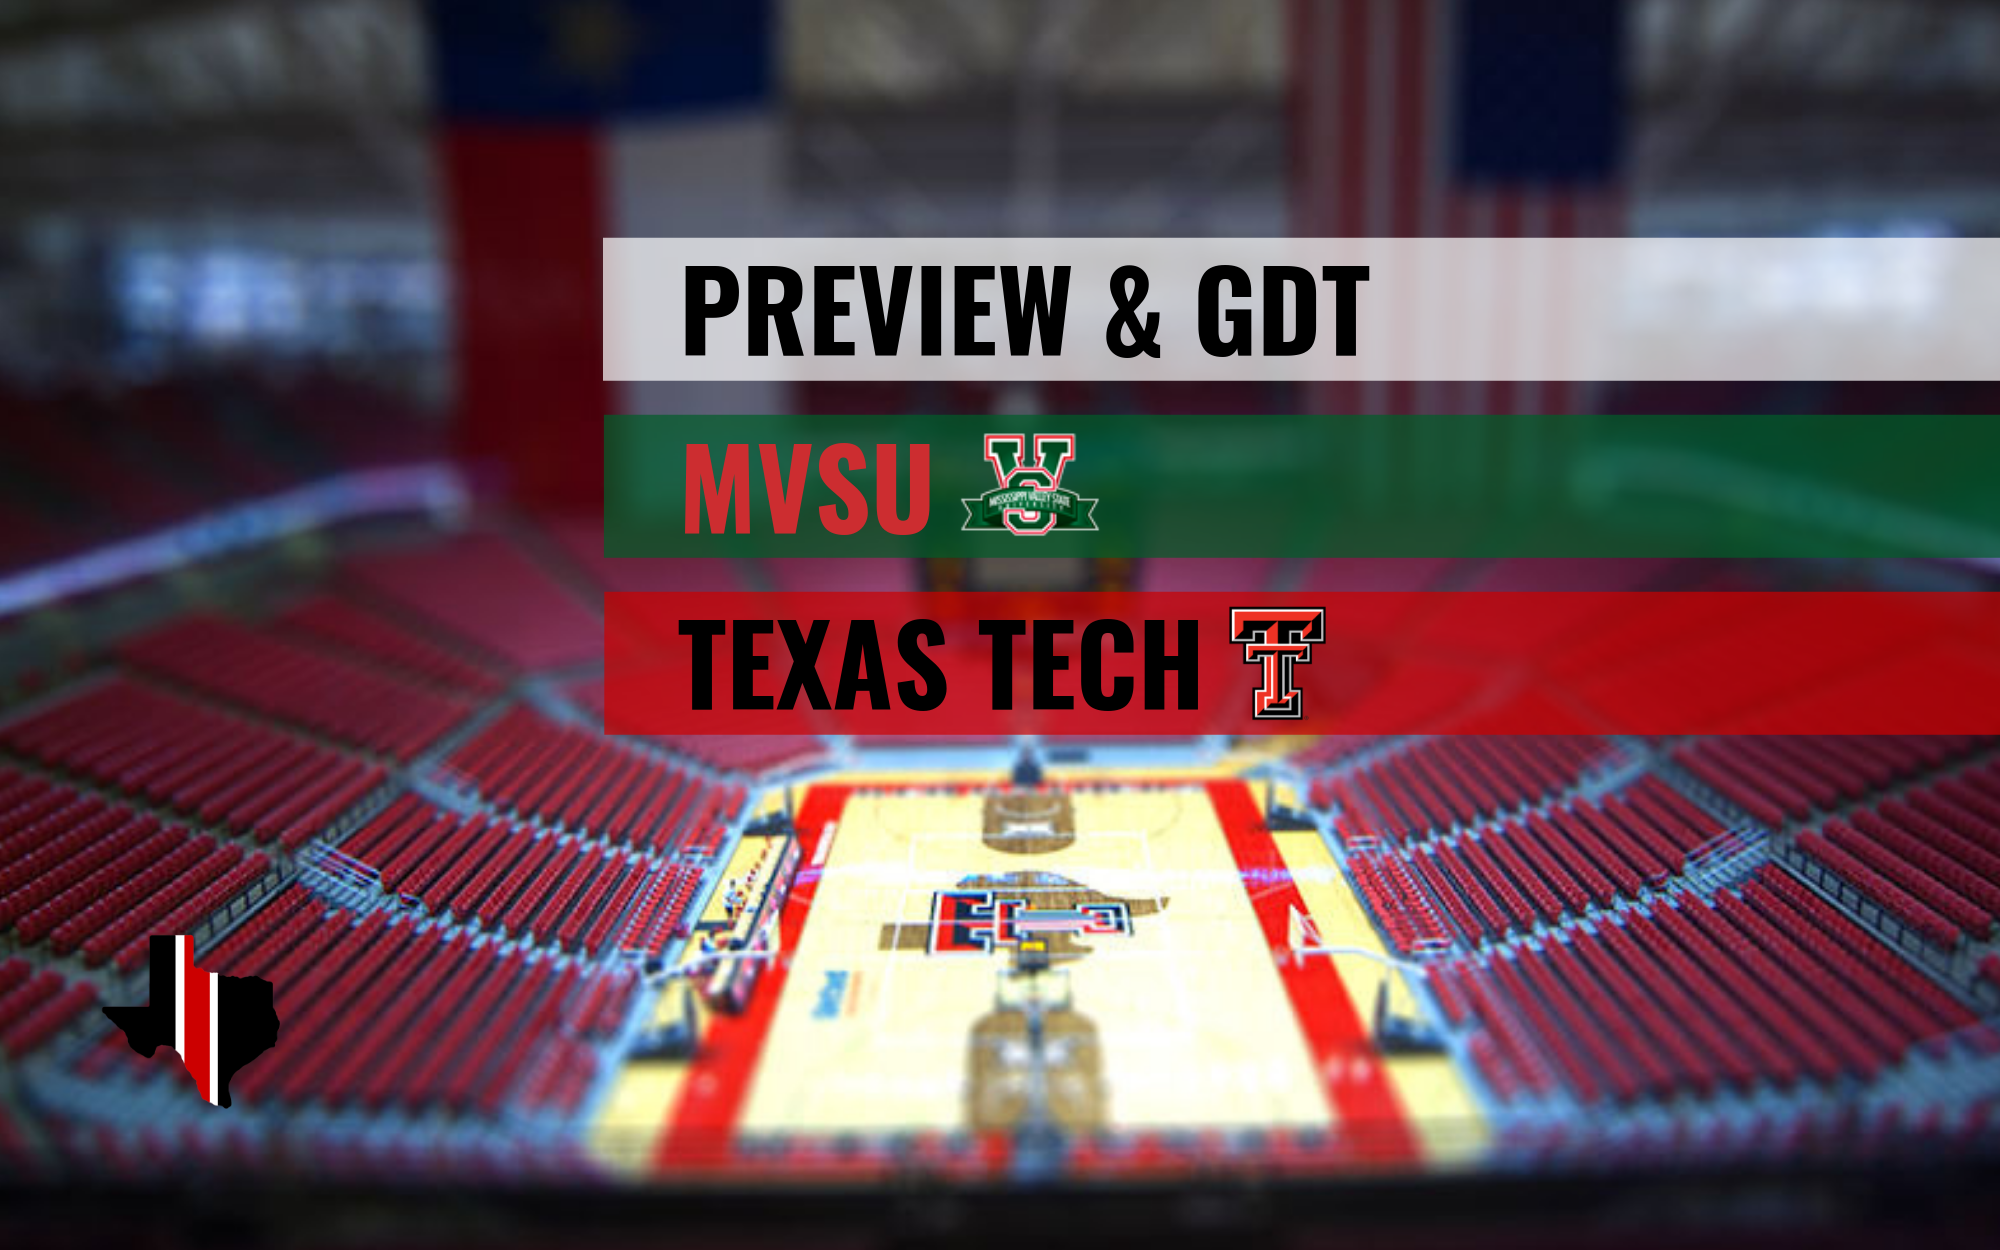 Preview & GDT: Mississippi Valley State vs. Texas Tech